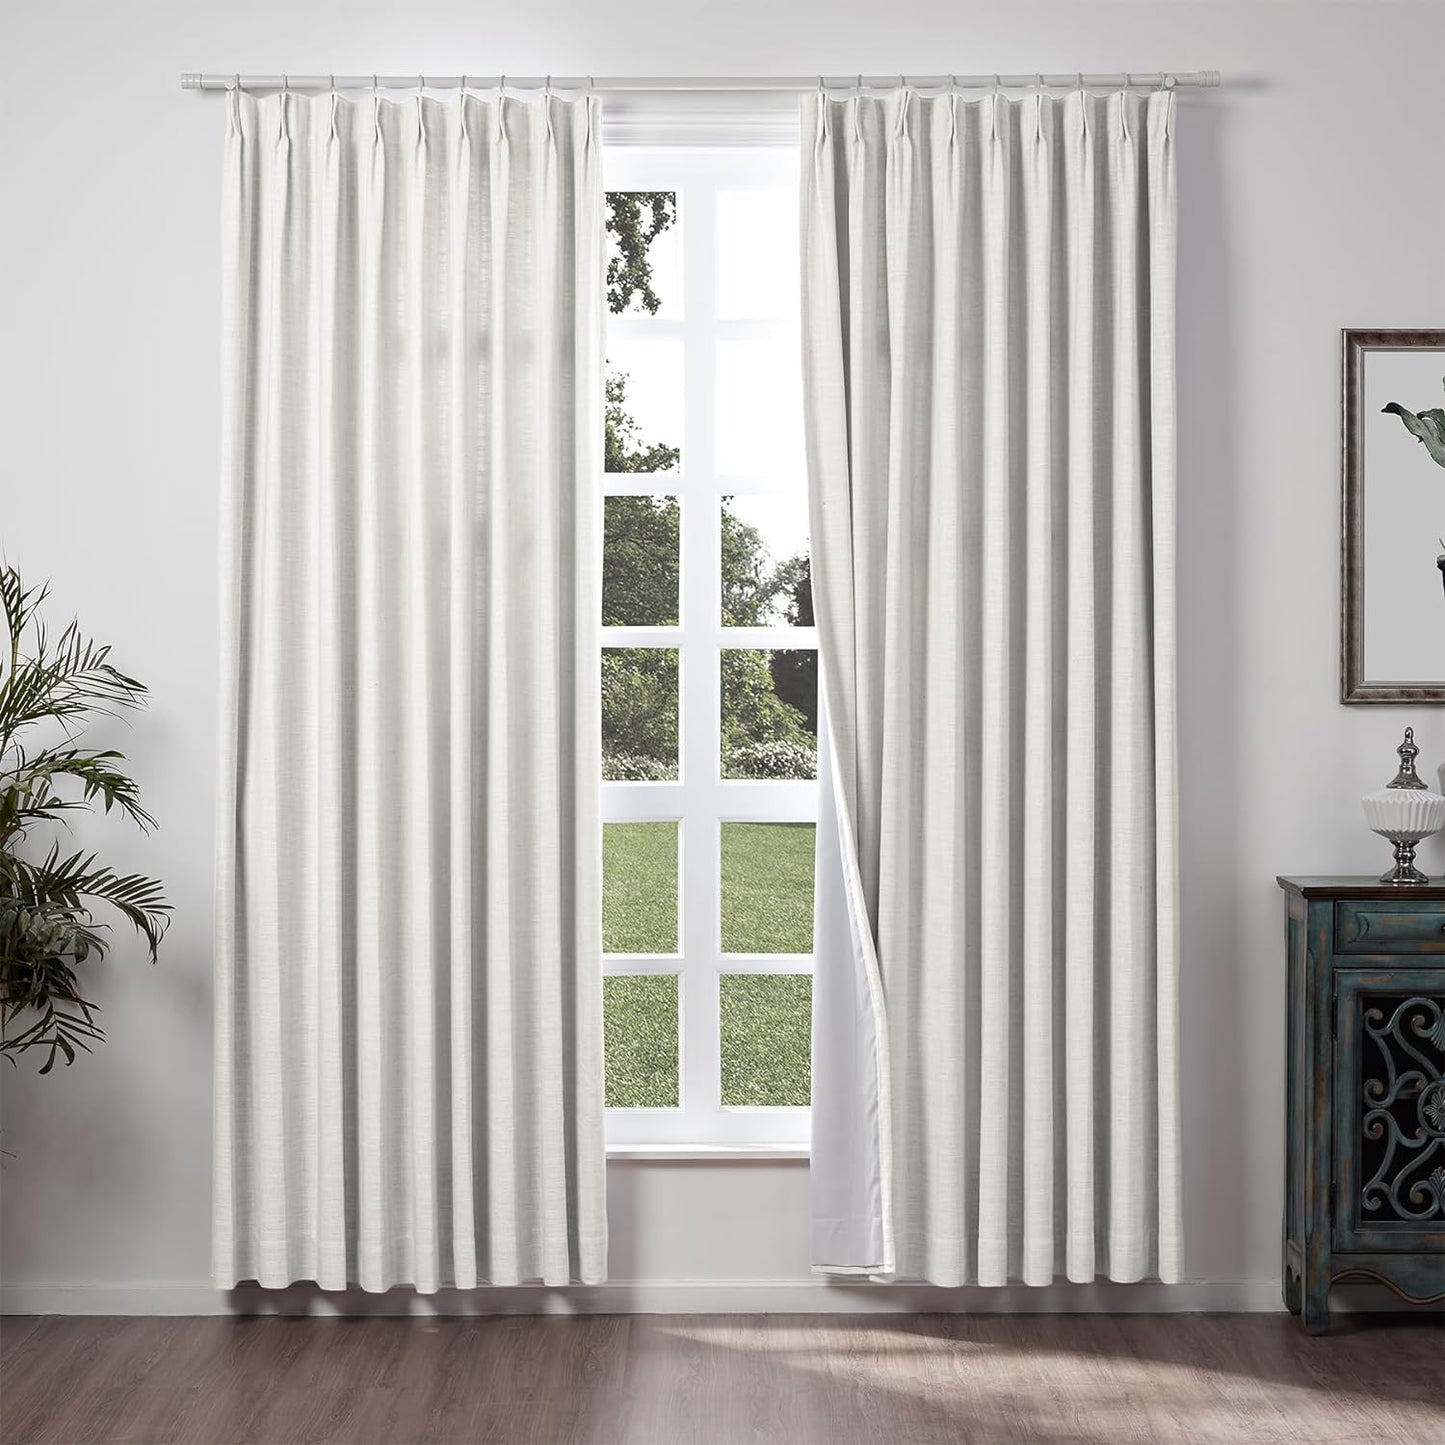 Chadmade 50" W X 63" L Polyester Linen Drape with Blackout Lining Pinch Pleat Curtain for Sliding Door Patio Door Living Room Bedroom, (1 Panel) Sand Beige Tallis Collection  ChadMade Beige White (1) 50Wx63L 